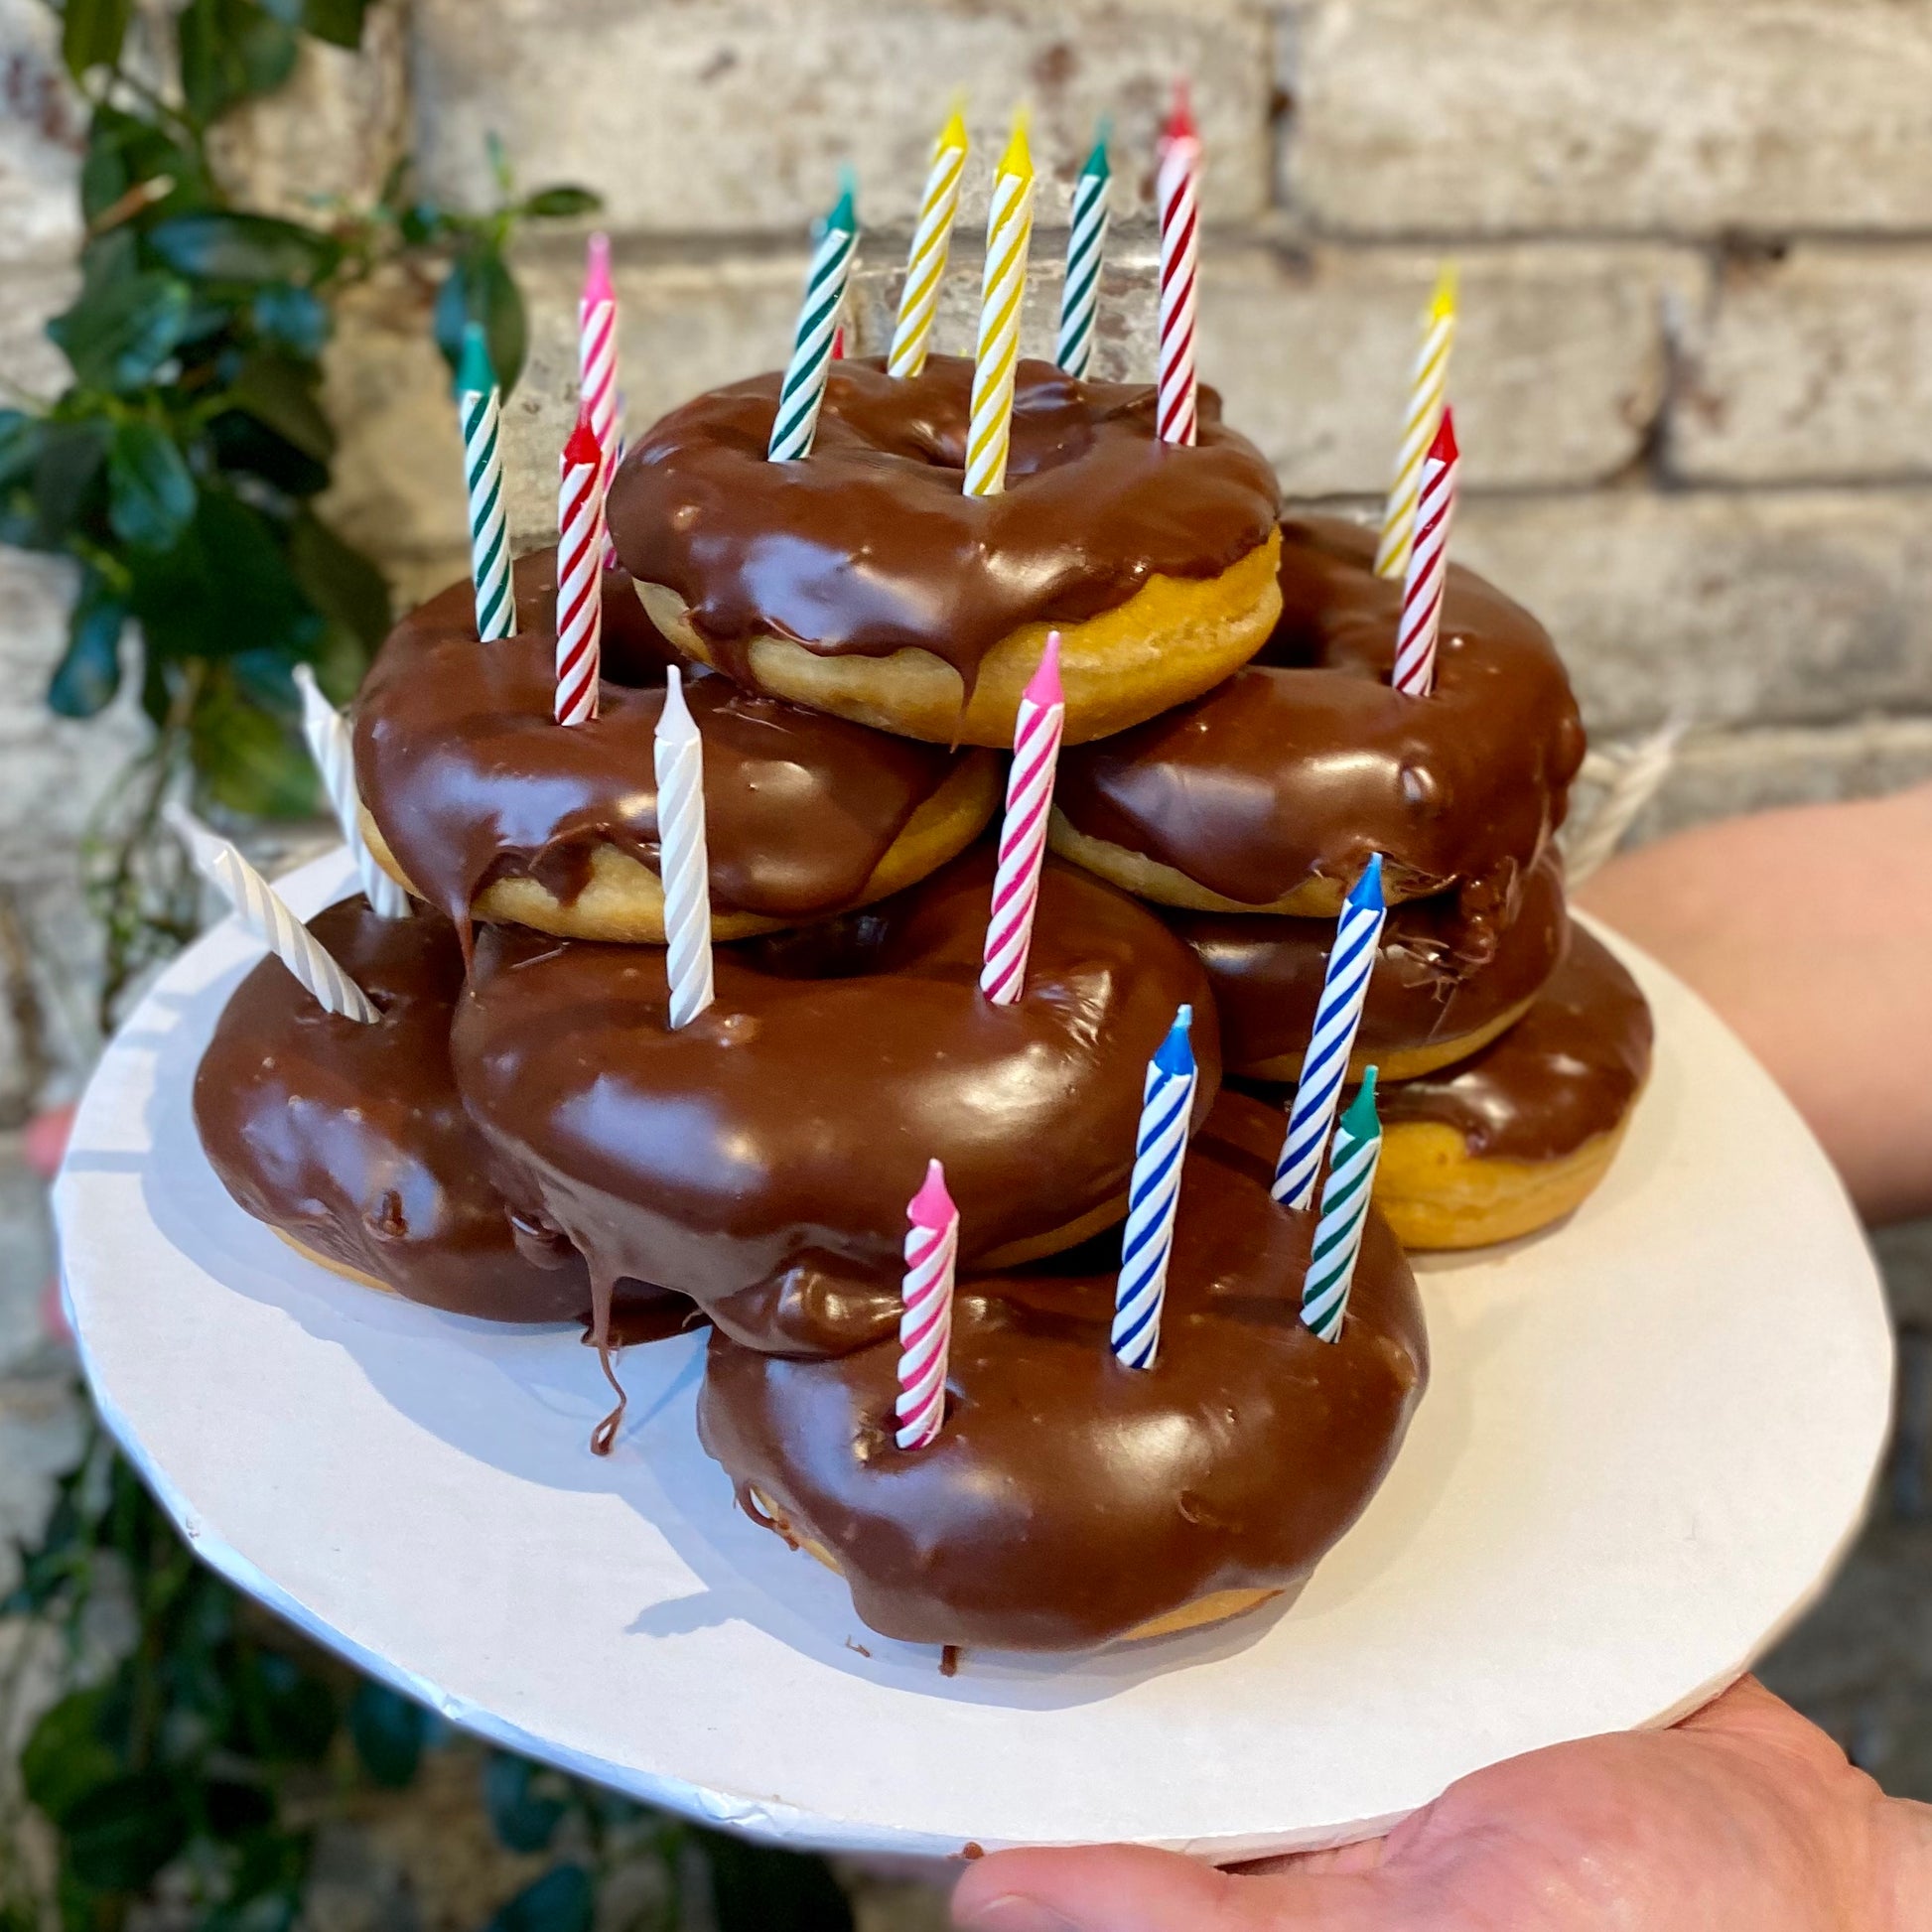 Pile of donuts with candles on top